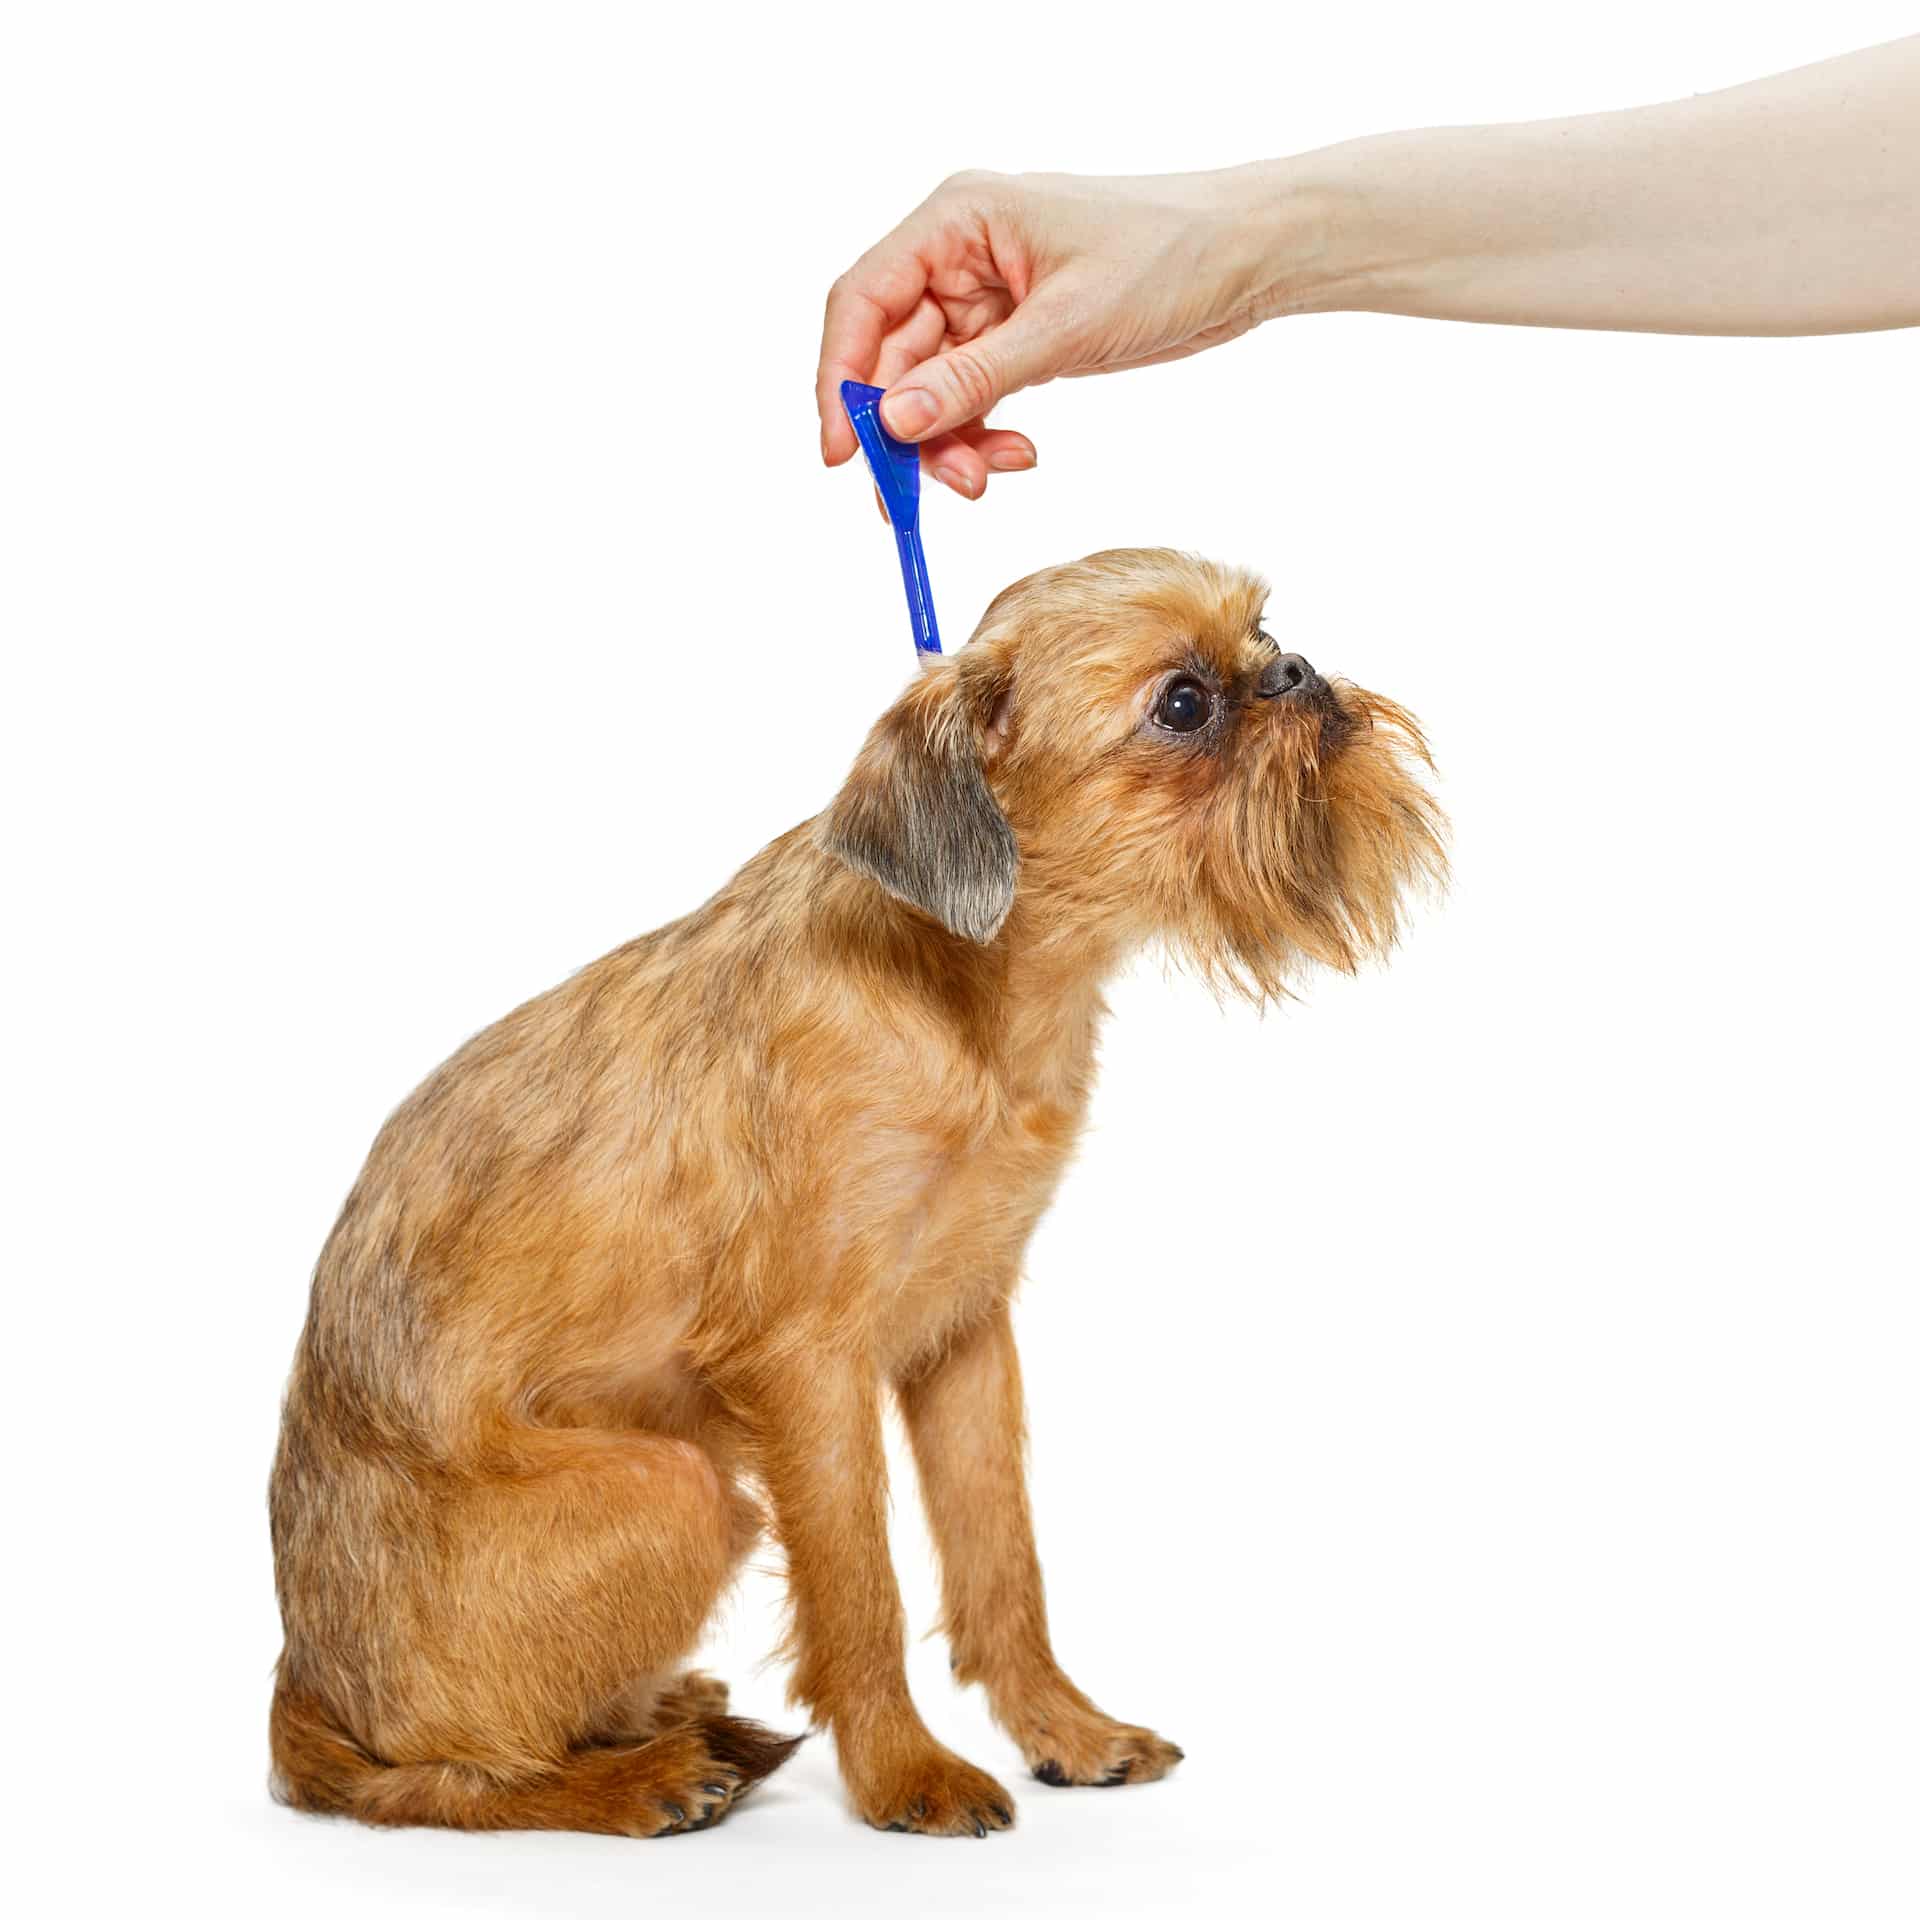 Treatment of dogs for fleas and ticks